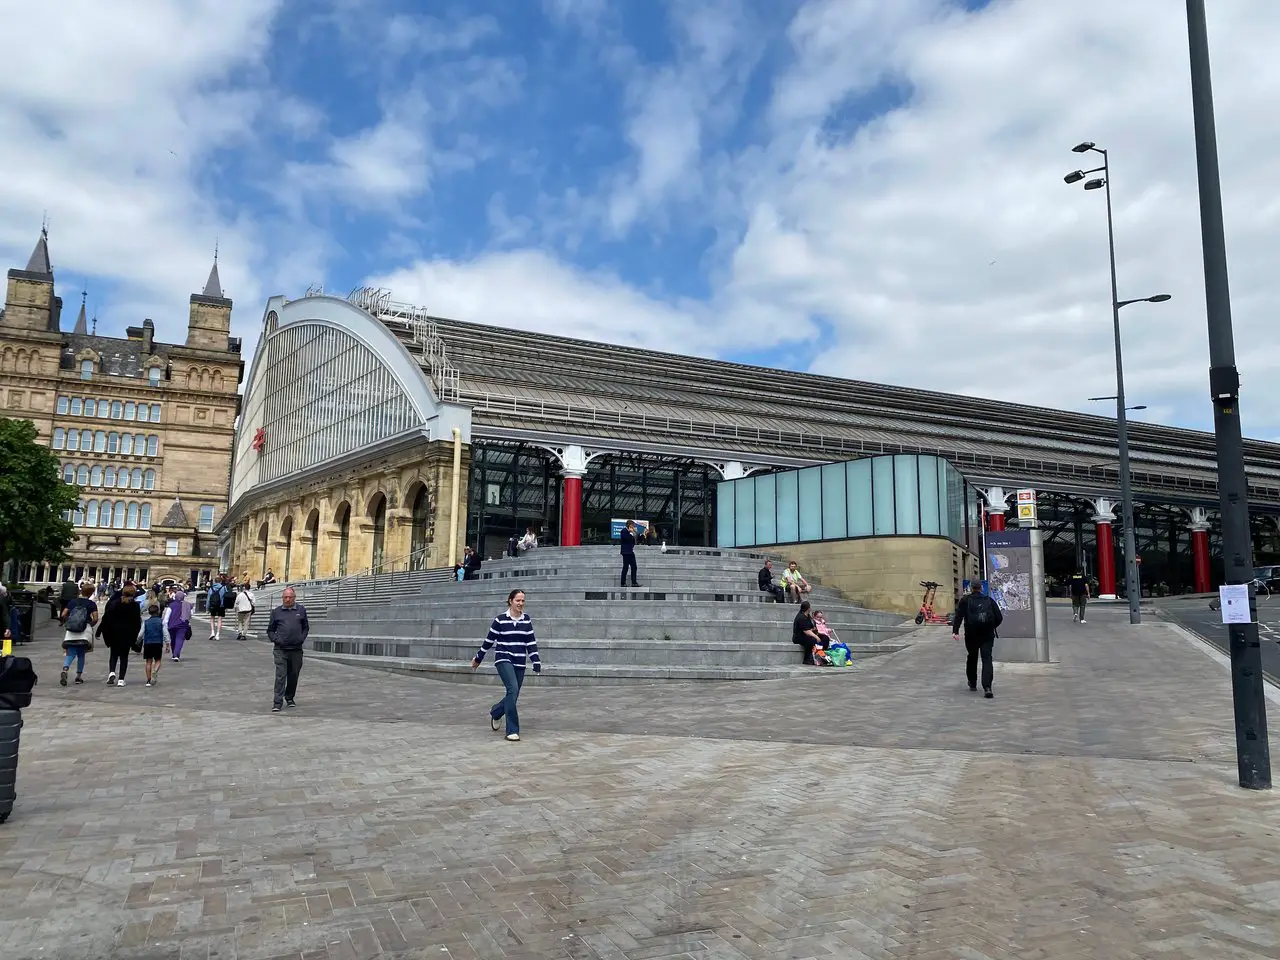 Exterior of Liverpool Lime Street station during the daytime. People are walking up and down the steps leading to the station.